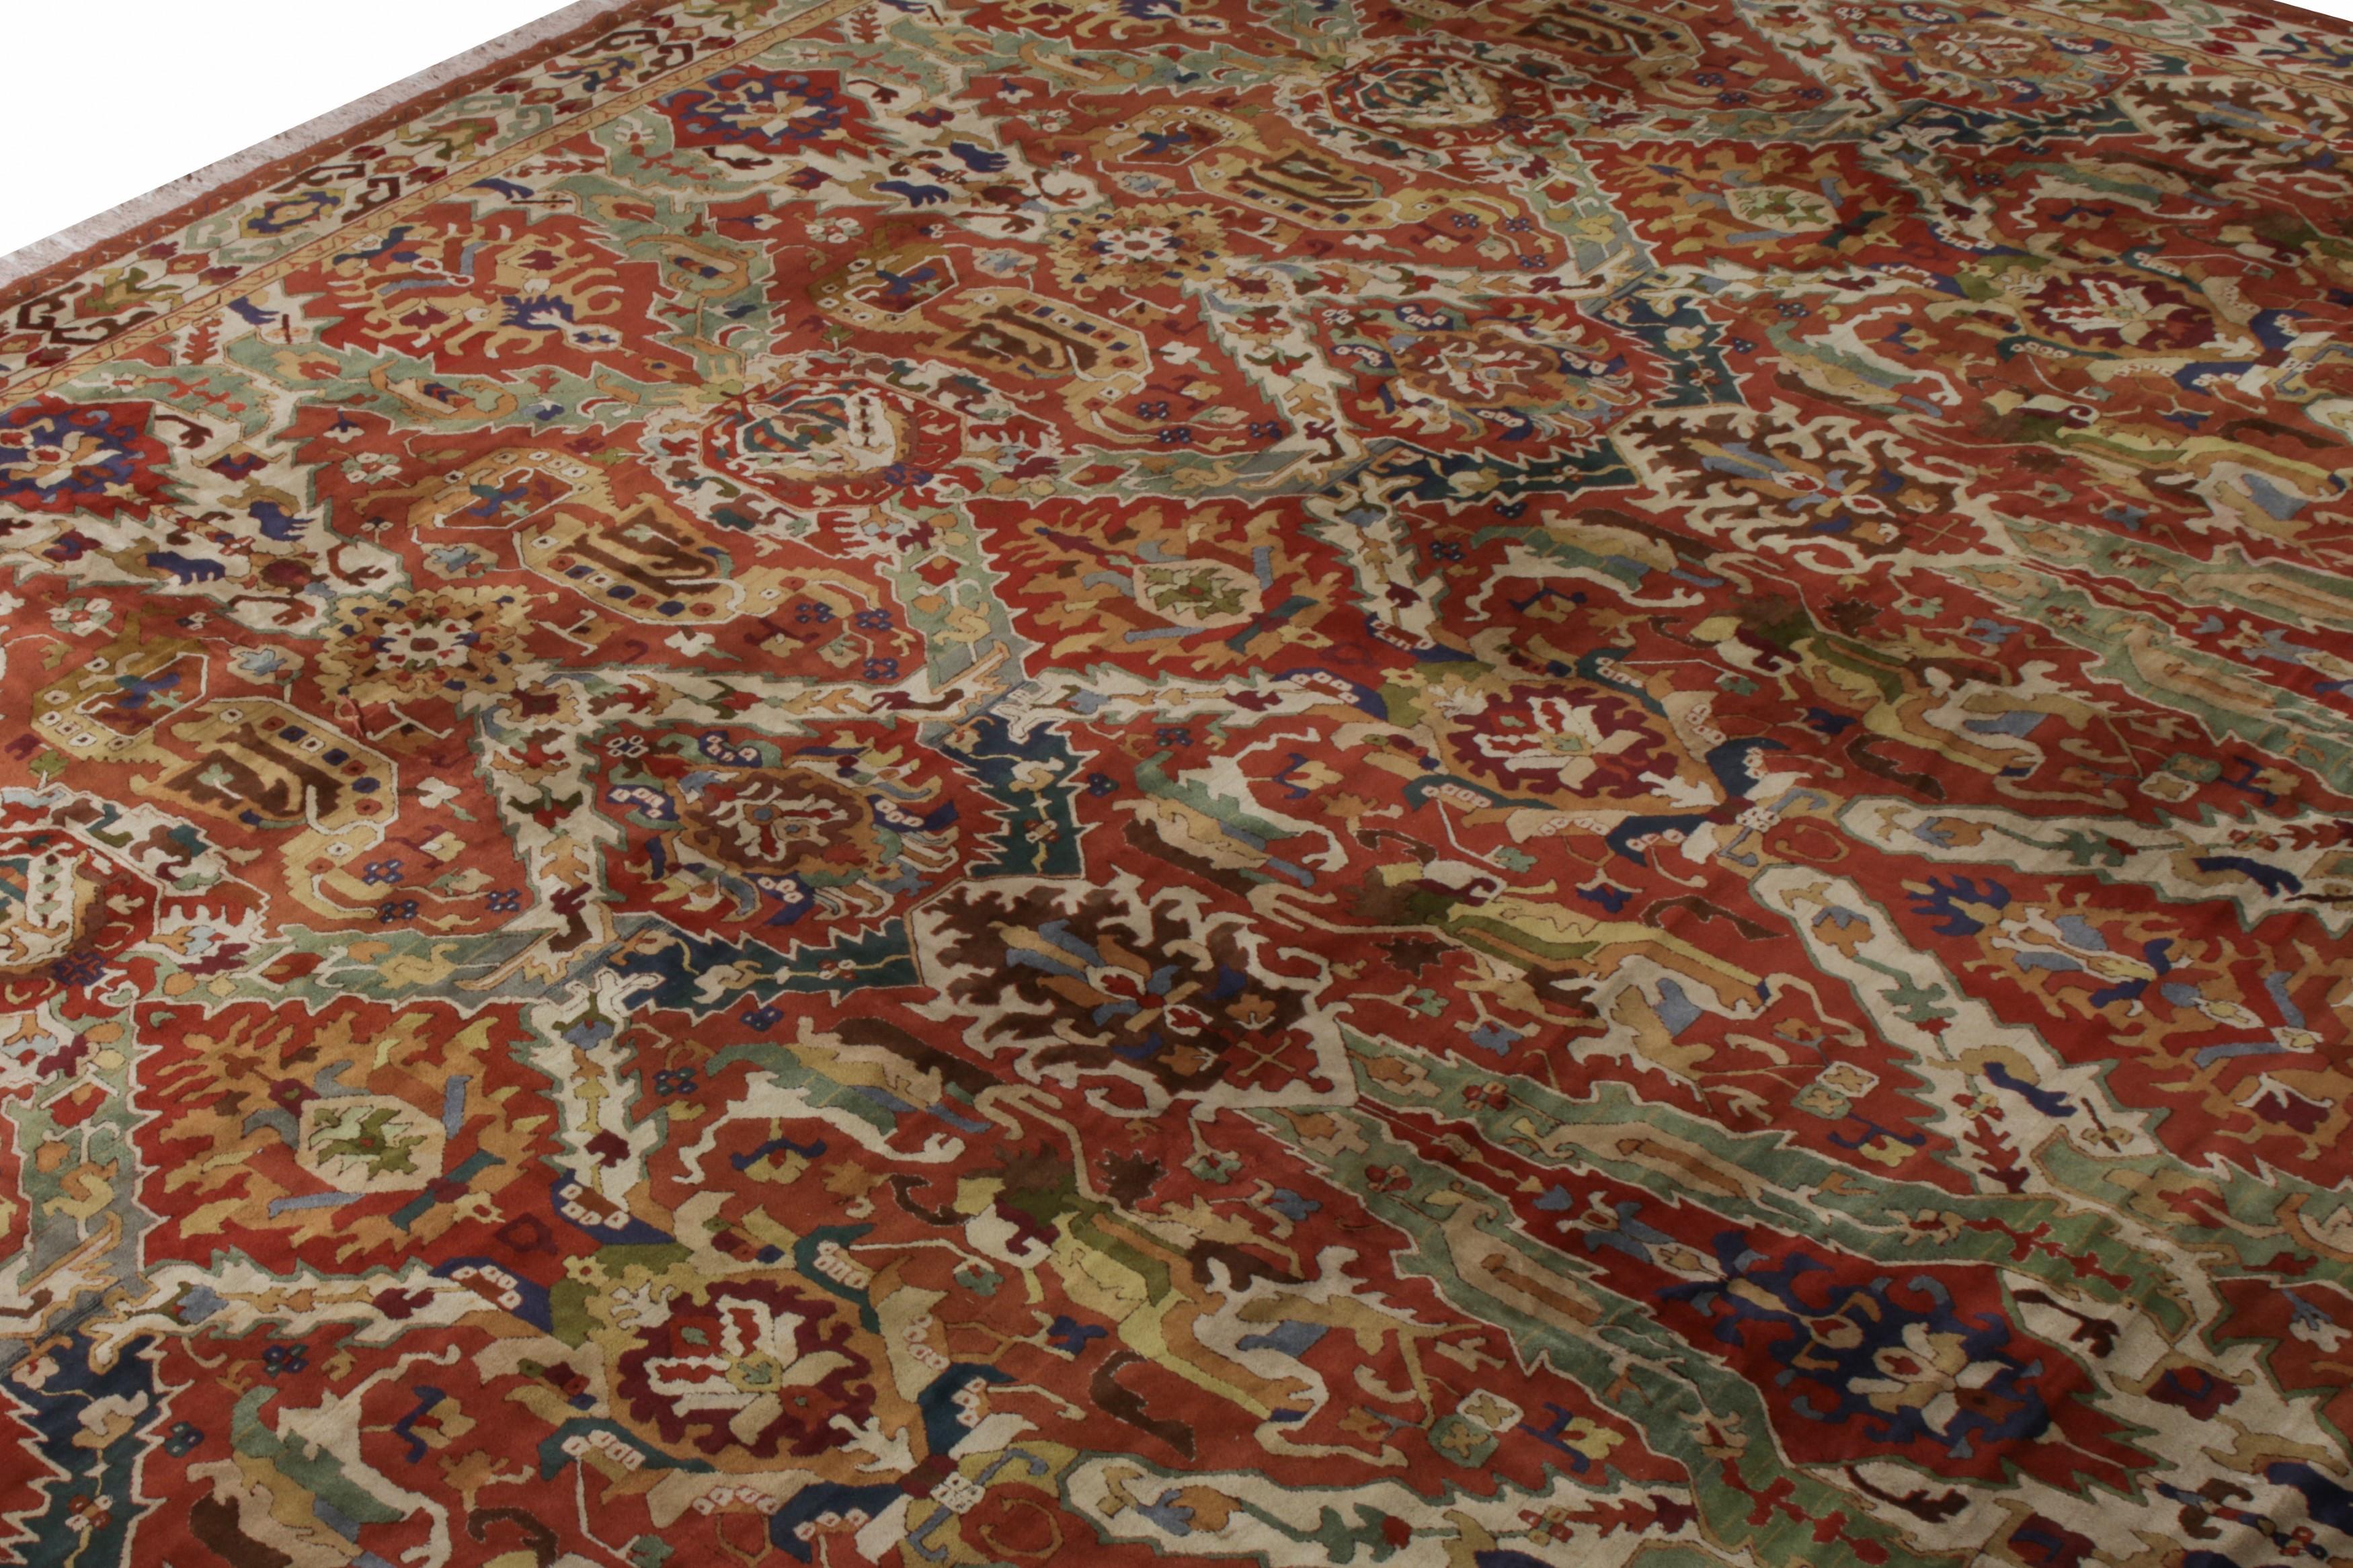 German Hand-Hooked Antique Rug in Red and Green All Over Floral Pattern For Sale